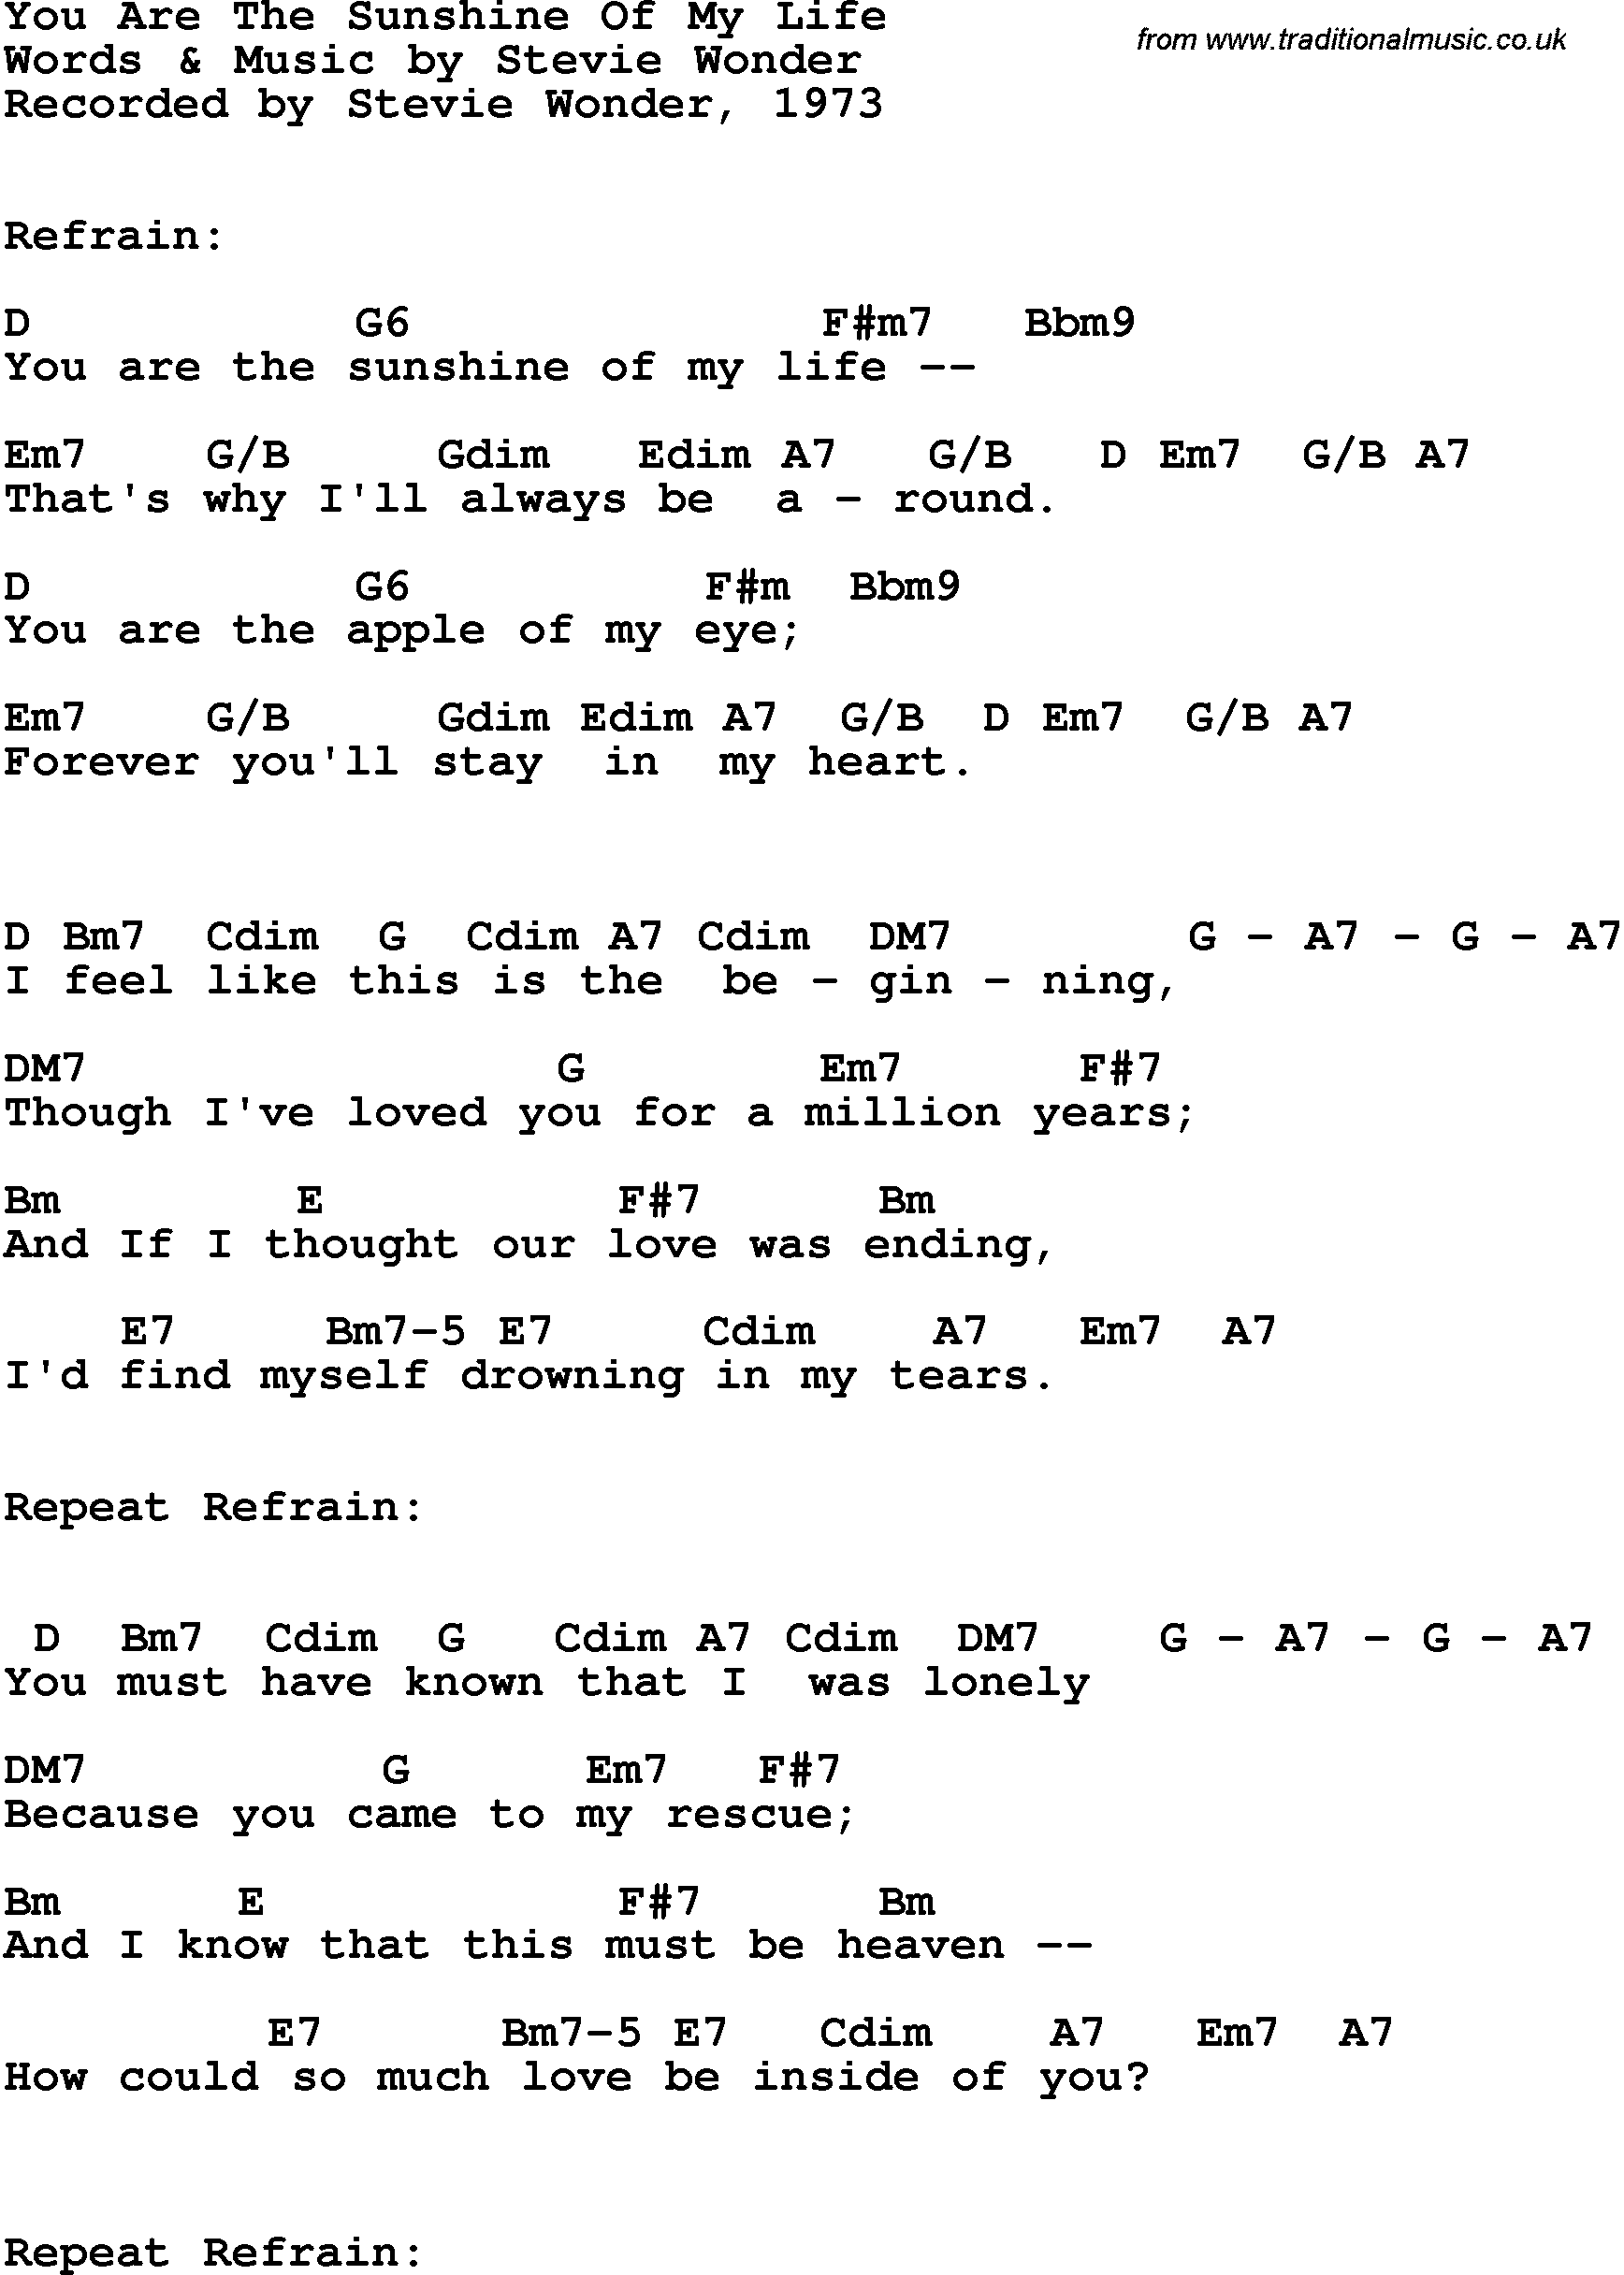 Song Lyrics with guitar chords for You Are The Sunshine Of My Life - Stevie Wonder, 1973